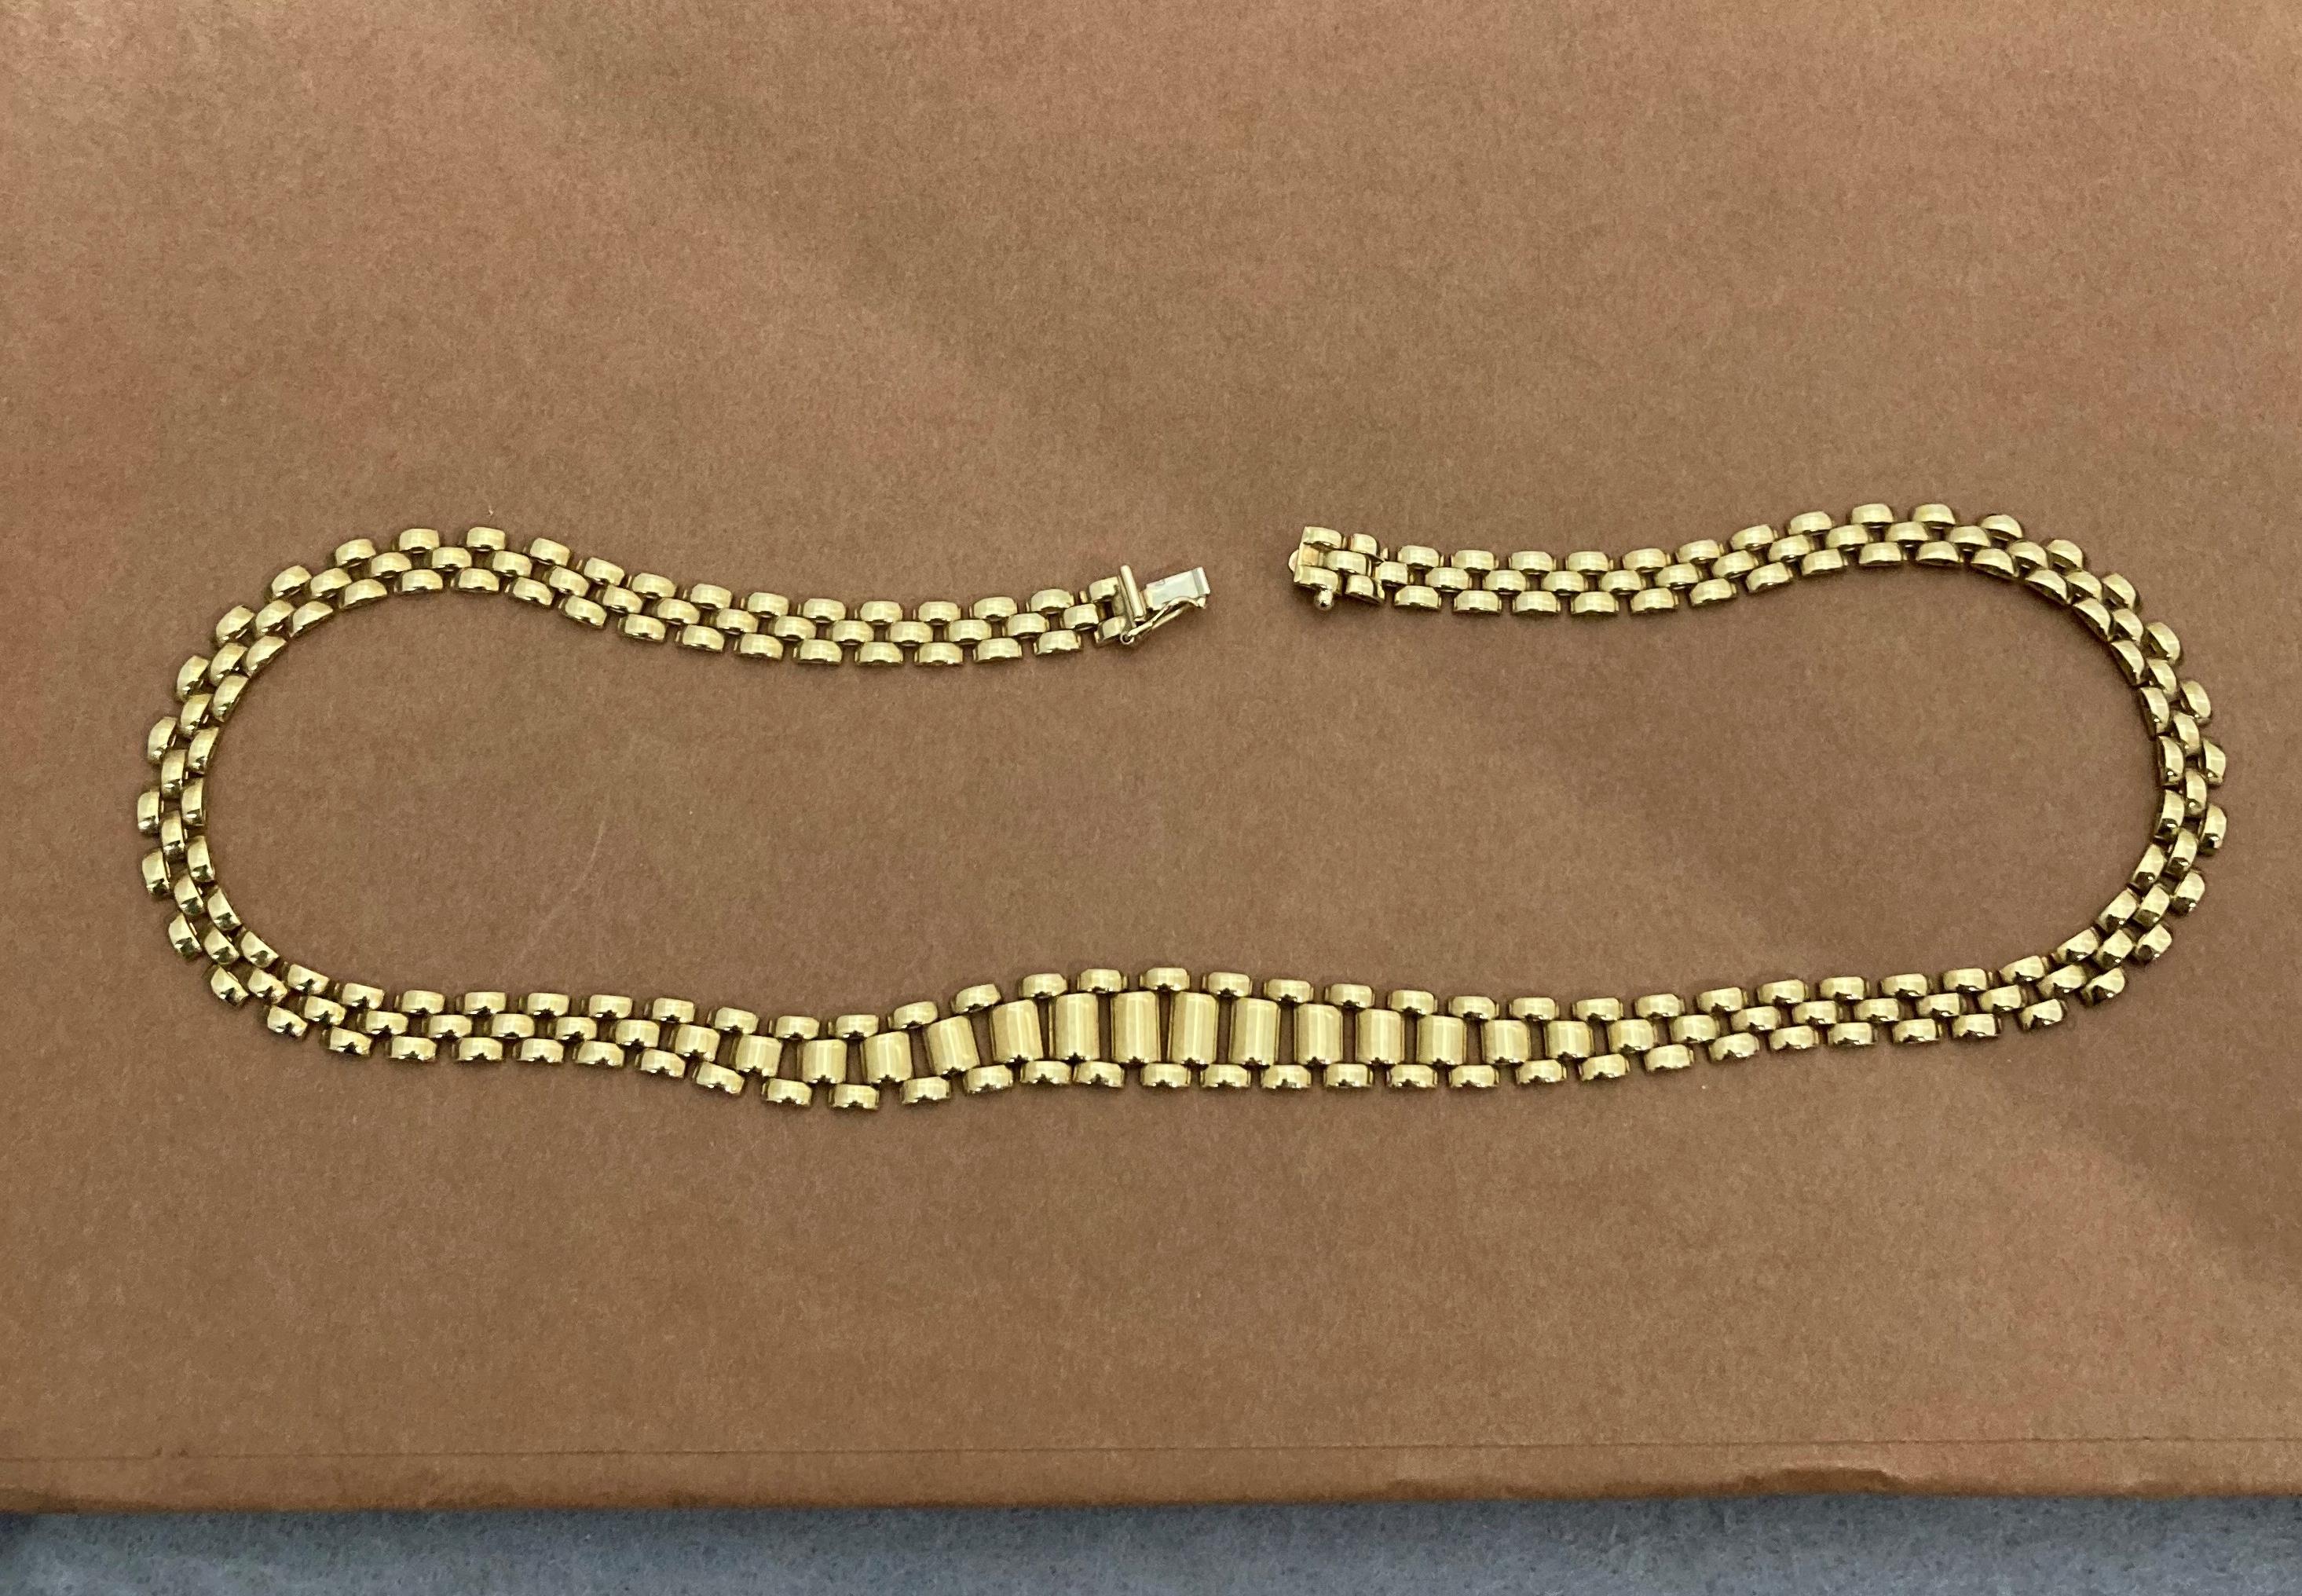 9ct 16" gold link chain necklace (made in Italy - weight 19g) - Image 2 of 3